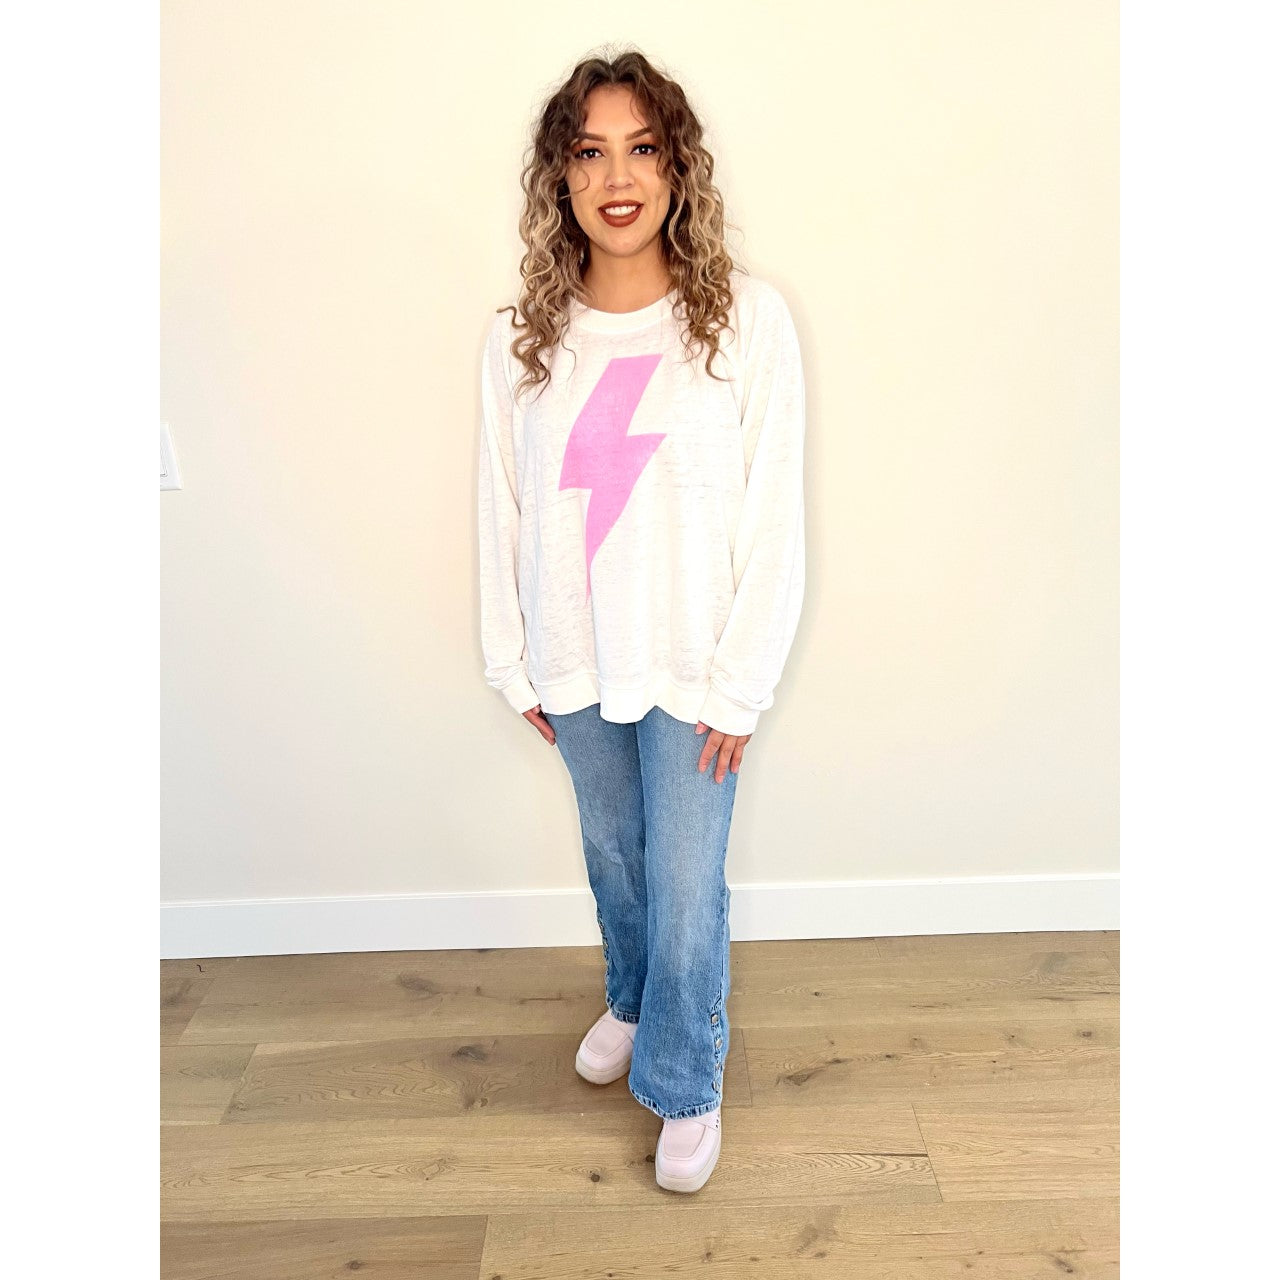 ACDC Pink Bolt Long Sleeve Sweater